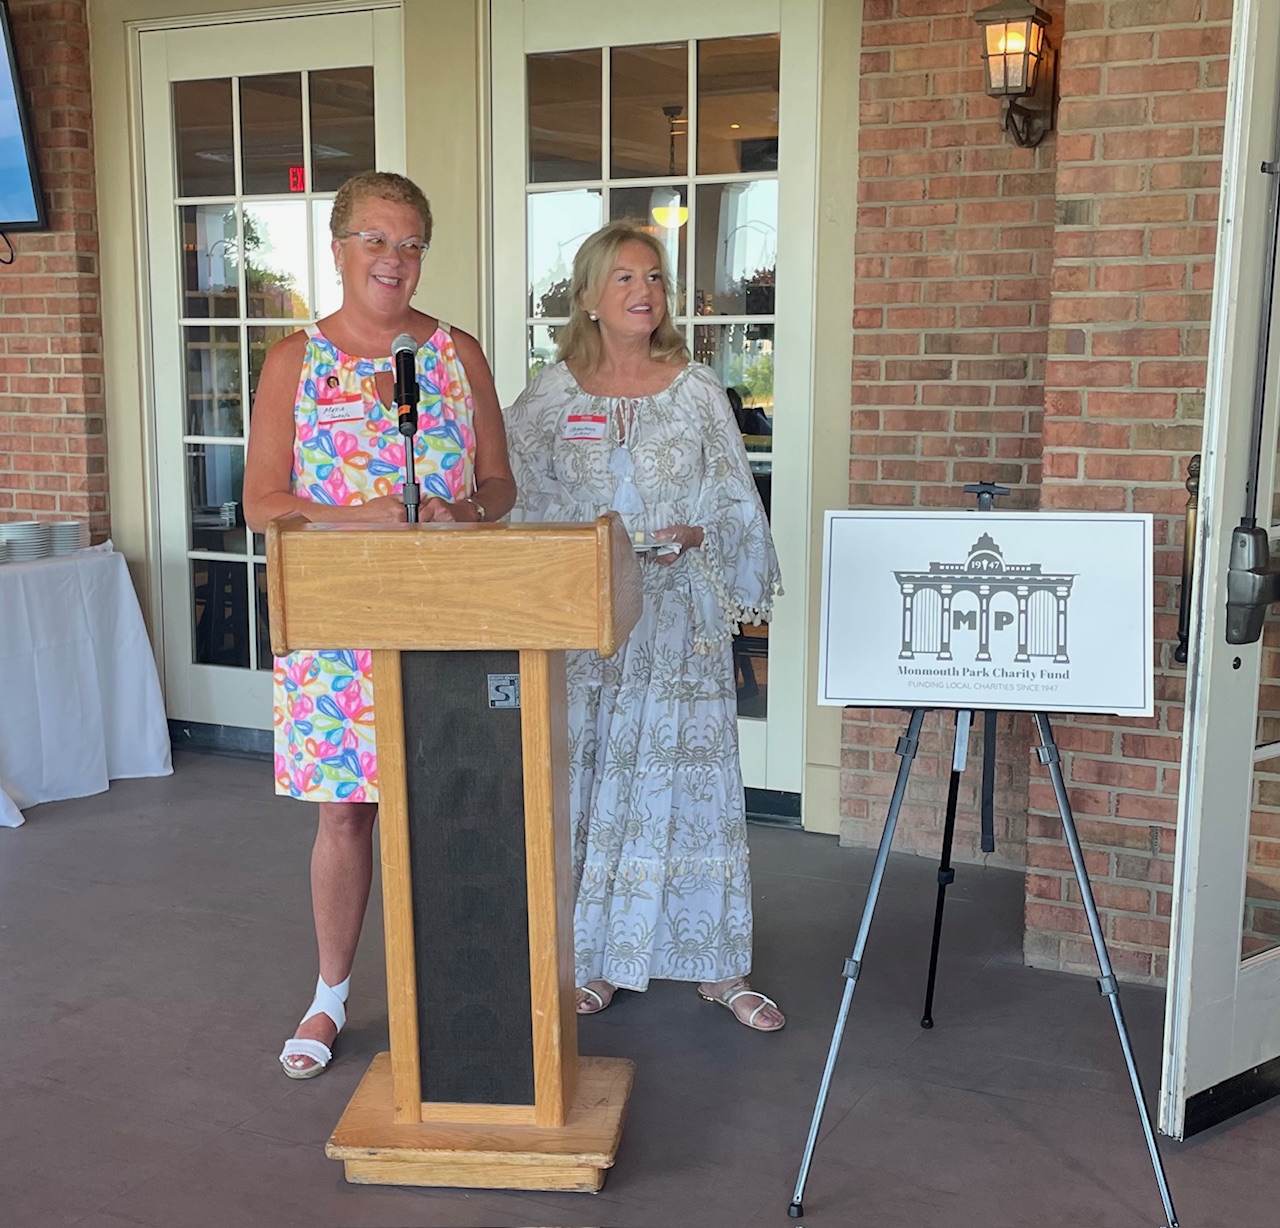 Co-Presidents of the Monmouth Park Charity Fund speaking at the Winner's Circle Society annual meeting